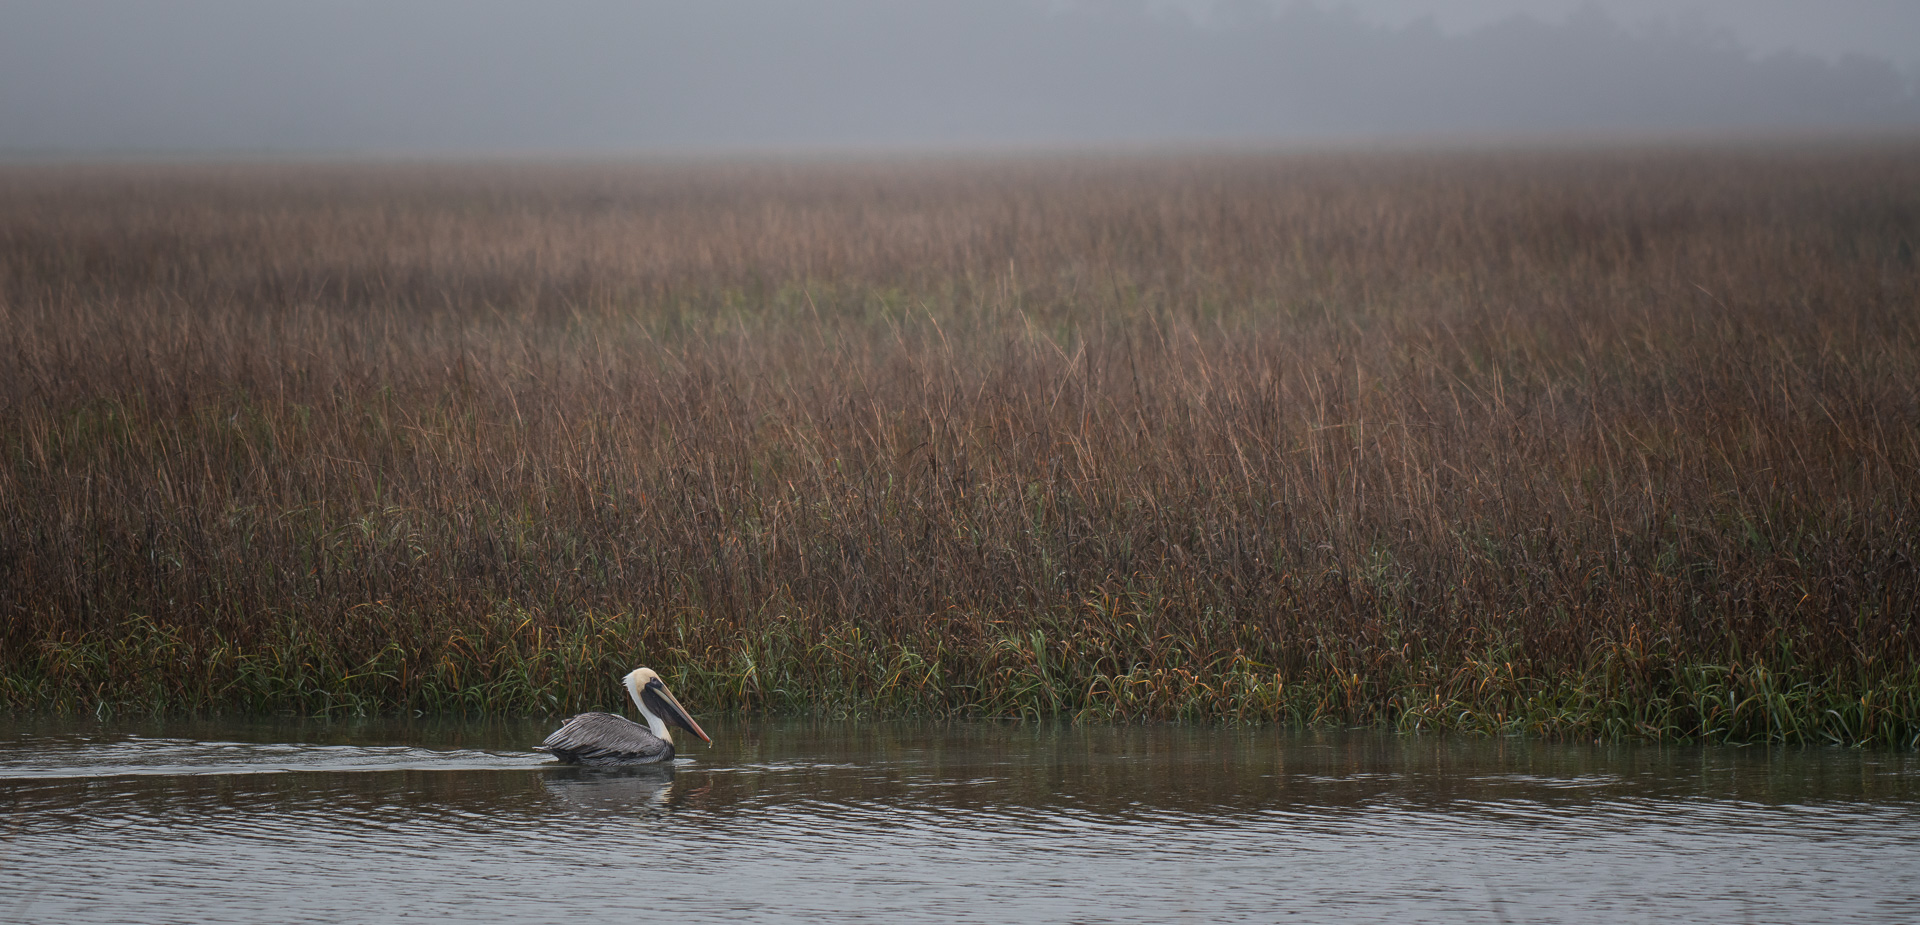 Passing Time in the Fog | Amelia Island